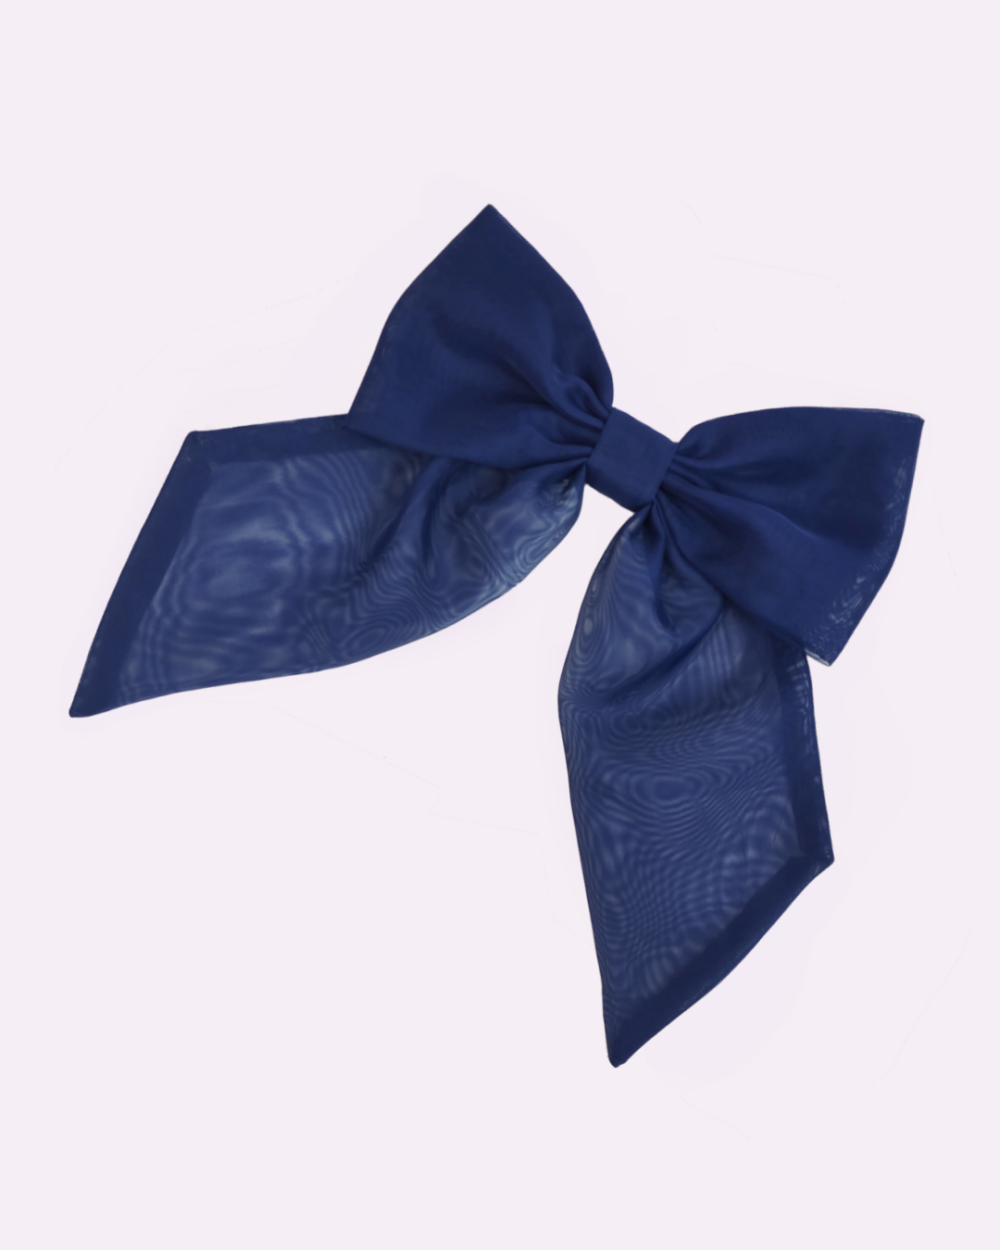 Navy brooch in the shape of a giant bow made of voile by melikestea.